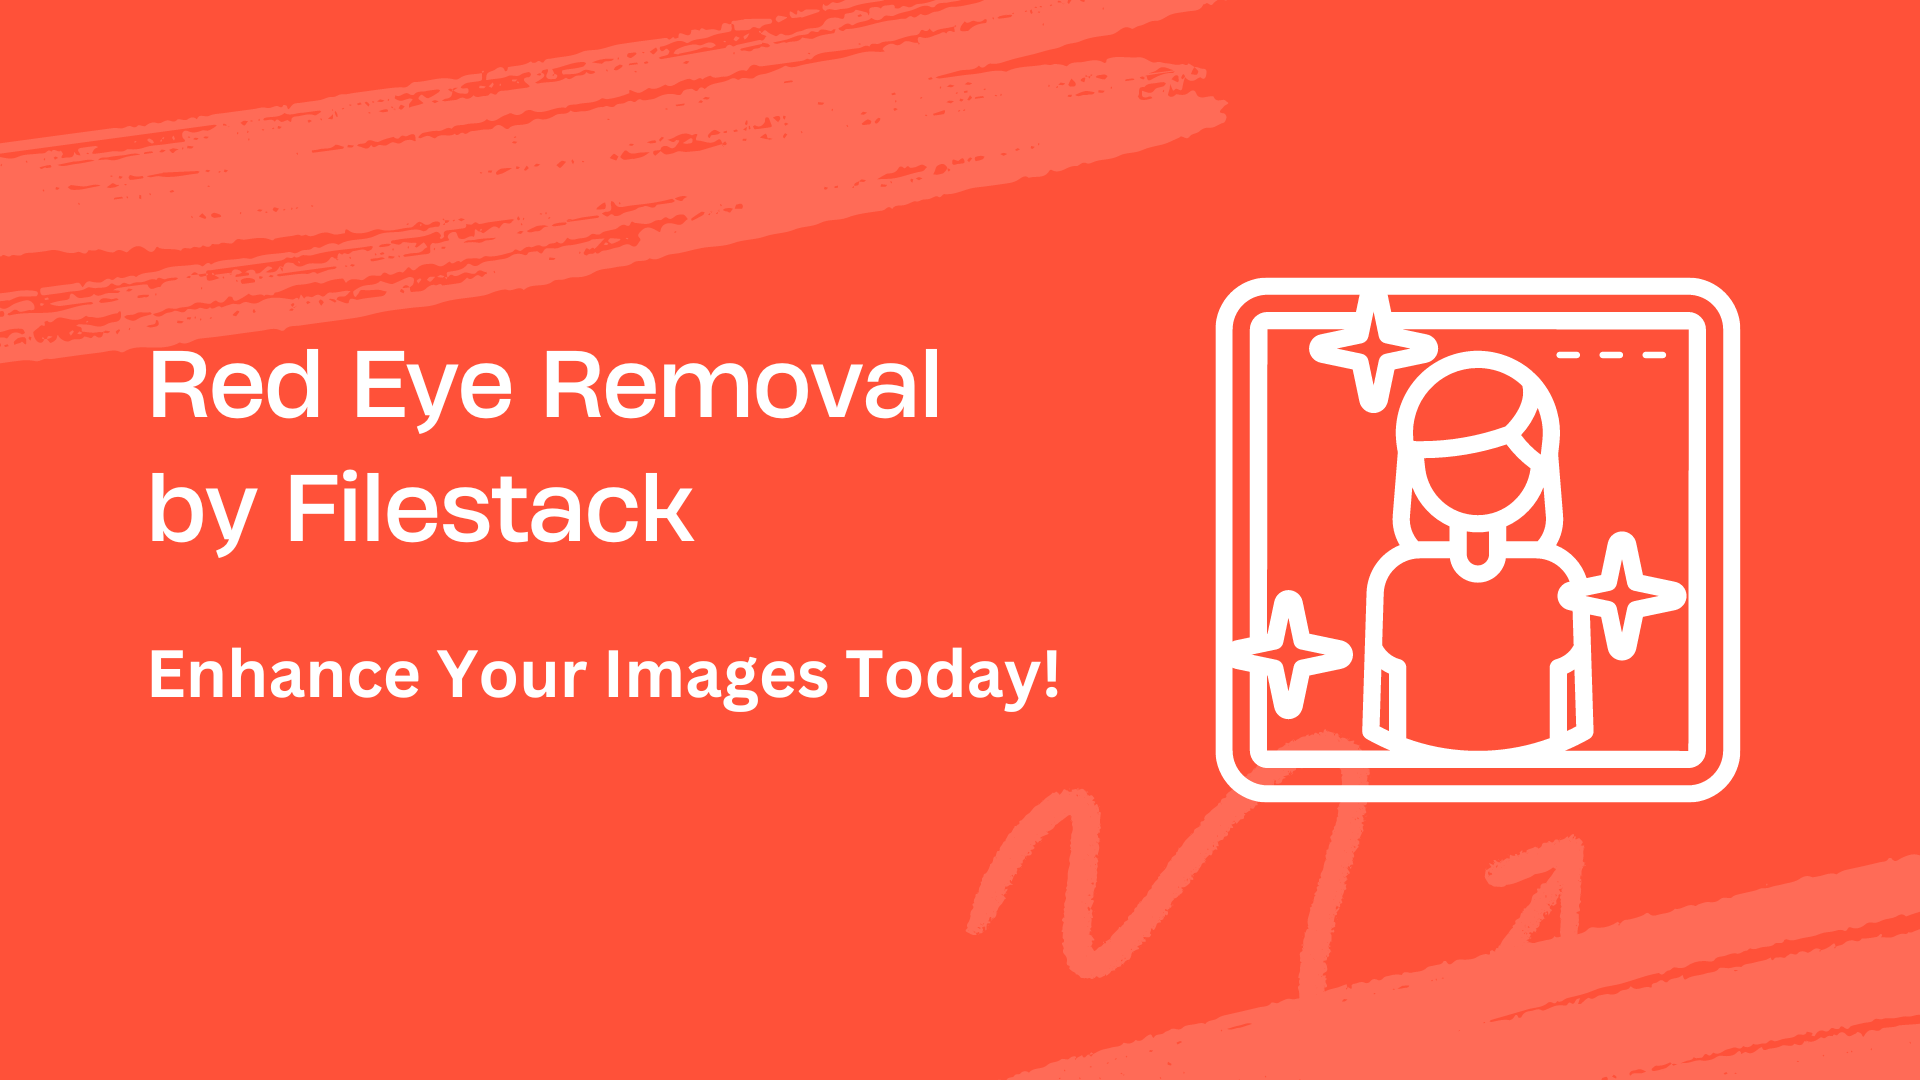 Red Eye Removal by Filestack Enhance Your Images Today!